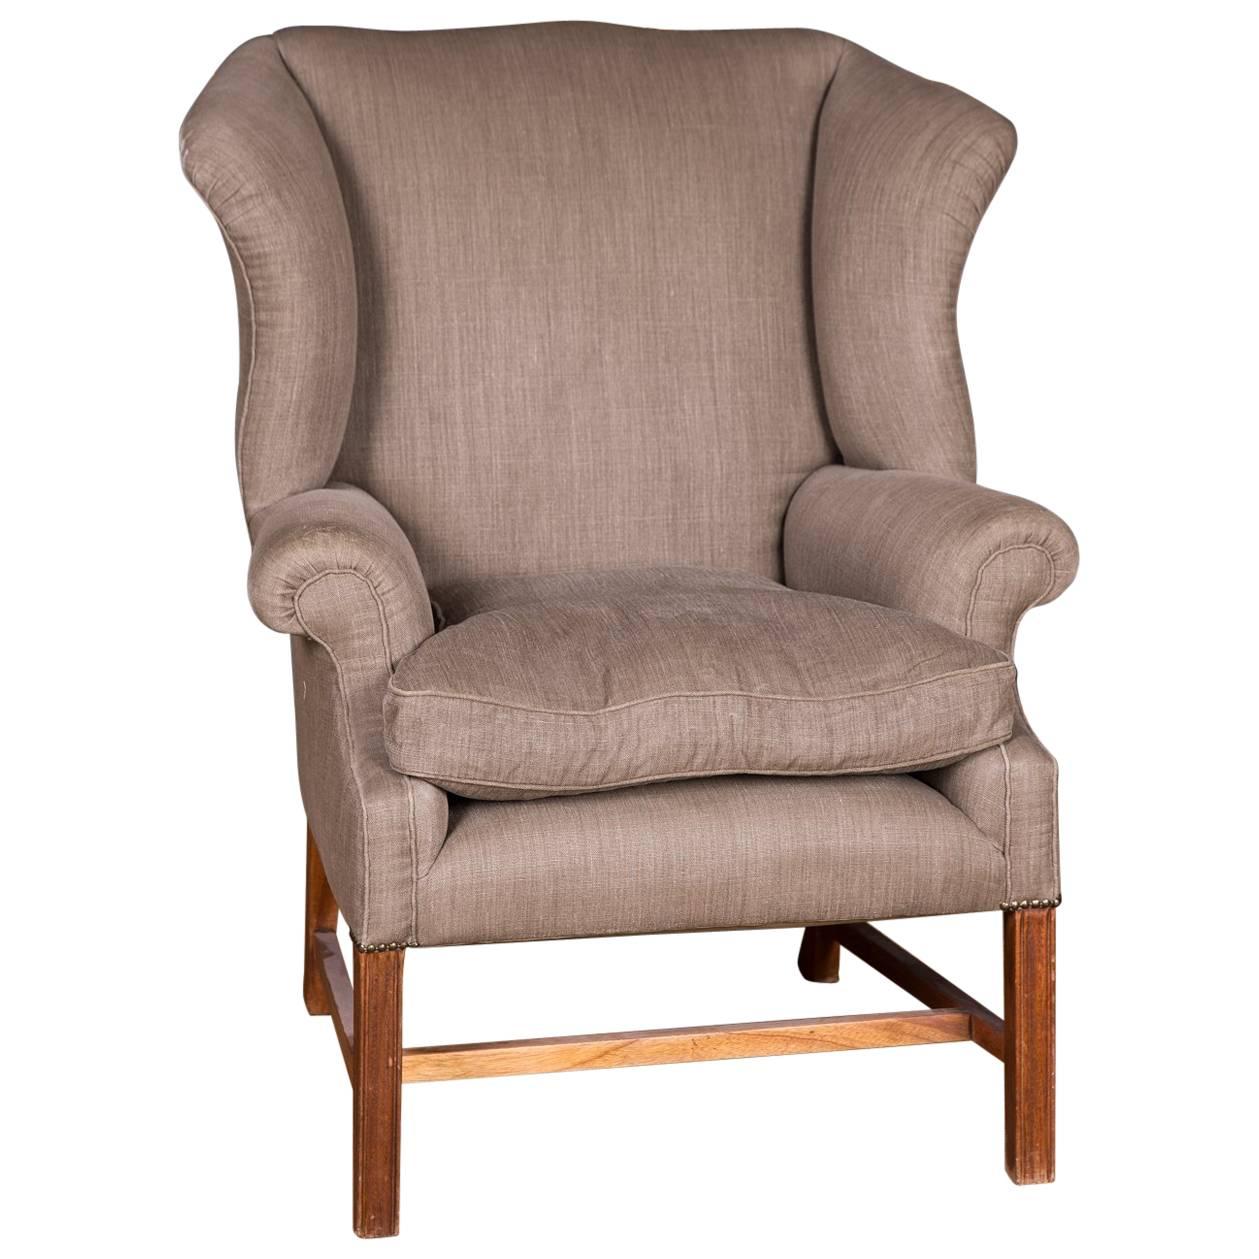 Original English Chesterfield Armchair with High Quality Linen Fabric